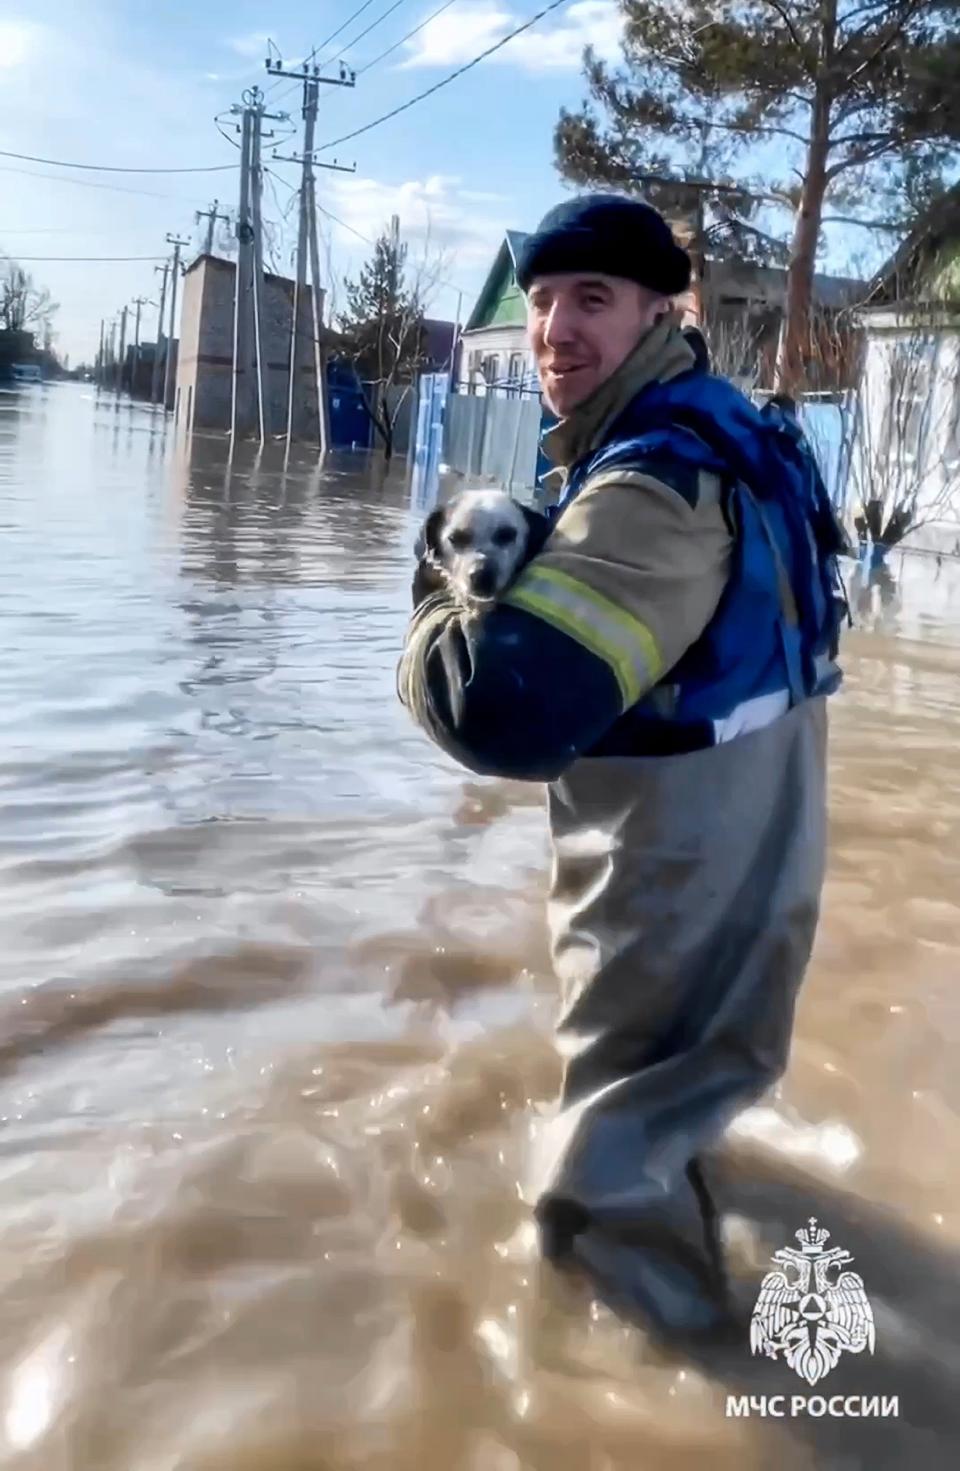 In this grab taken from a video released by the Russian Emergency Ministry Press Service on Saturday, April 6, 2024, a Russian Emergency Ministry worker carries a dog during an evacuation of local residents after a part of a dam burst causing flooding, in Orsk, Russia. Floods hit a city in the Ural Mountains areas after a river dam burst there, prompting evacuations of hundreds of people, local authorities said. The dam breach in Orsk, a city less than 20 kilometers north of Russia's border with Kazakhstan, occurred on Friday night, according to Orsk mayor Vasily Kozupitsa. (Russian Emergency Ministry Press Service via AP)